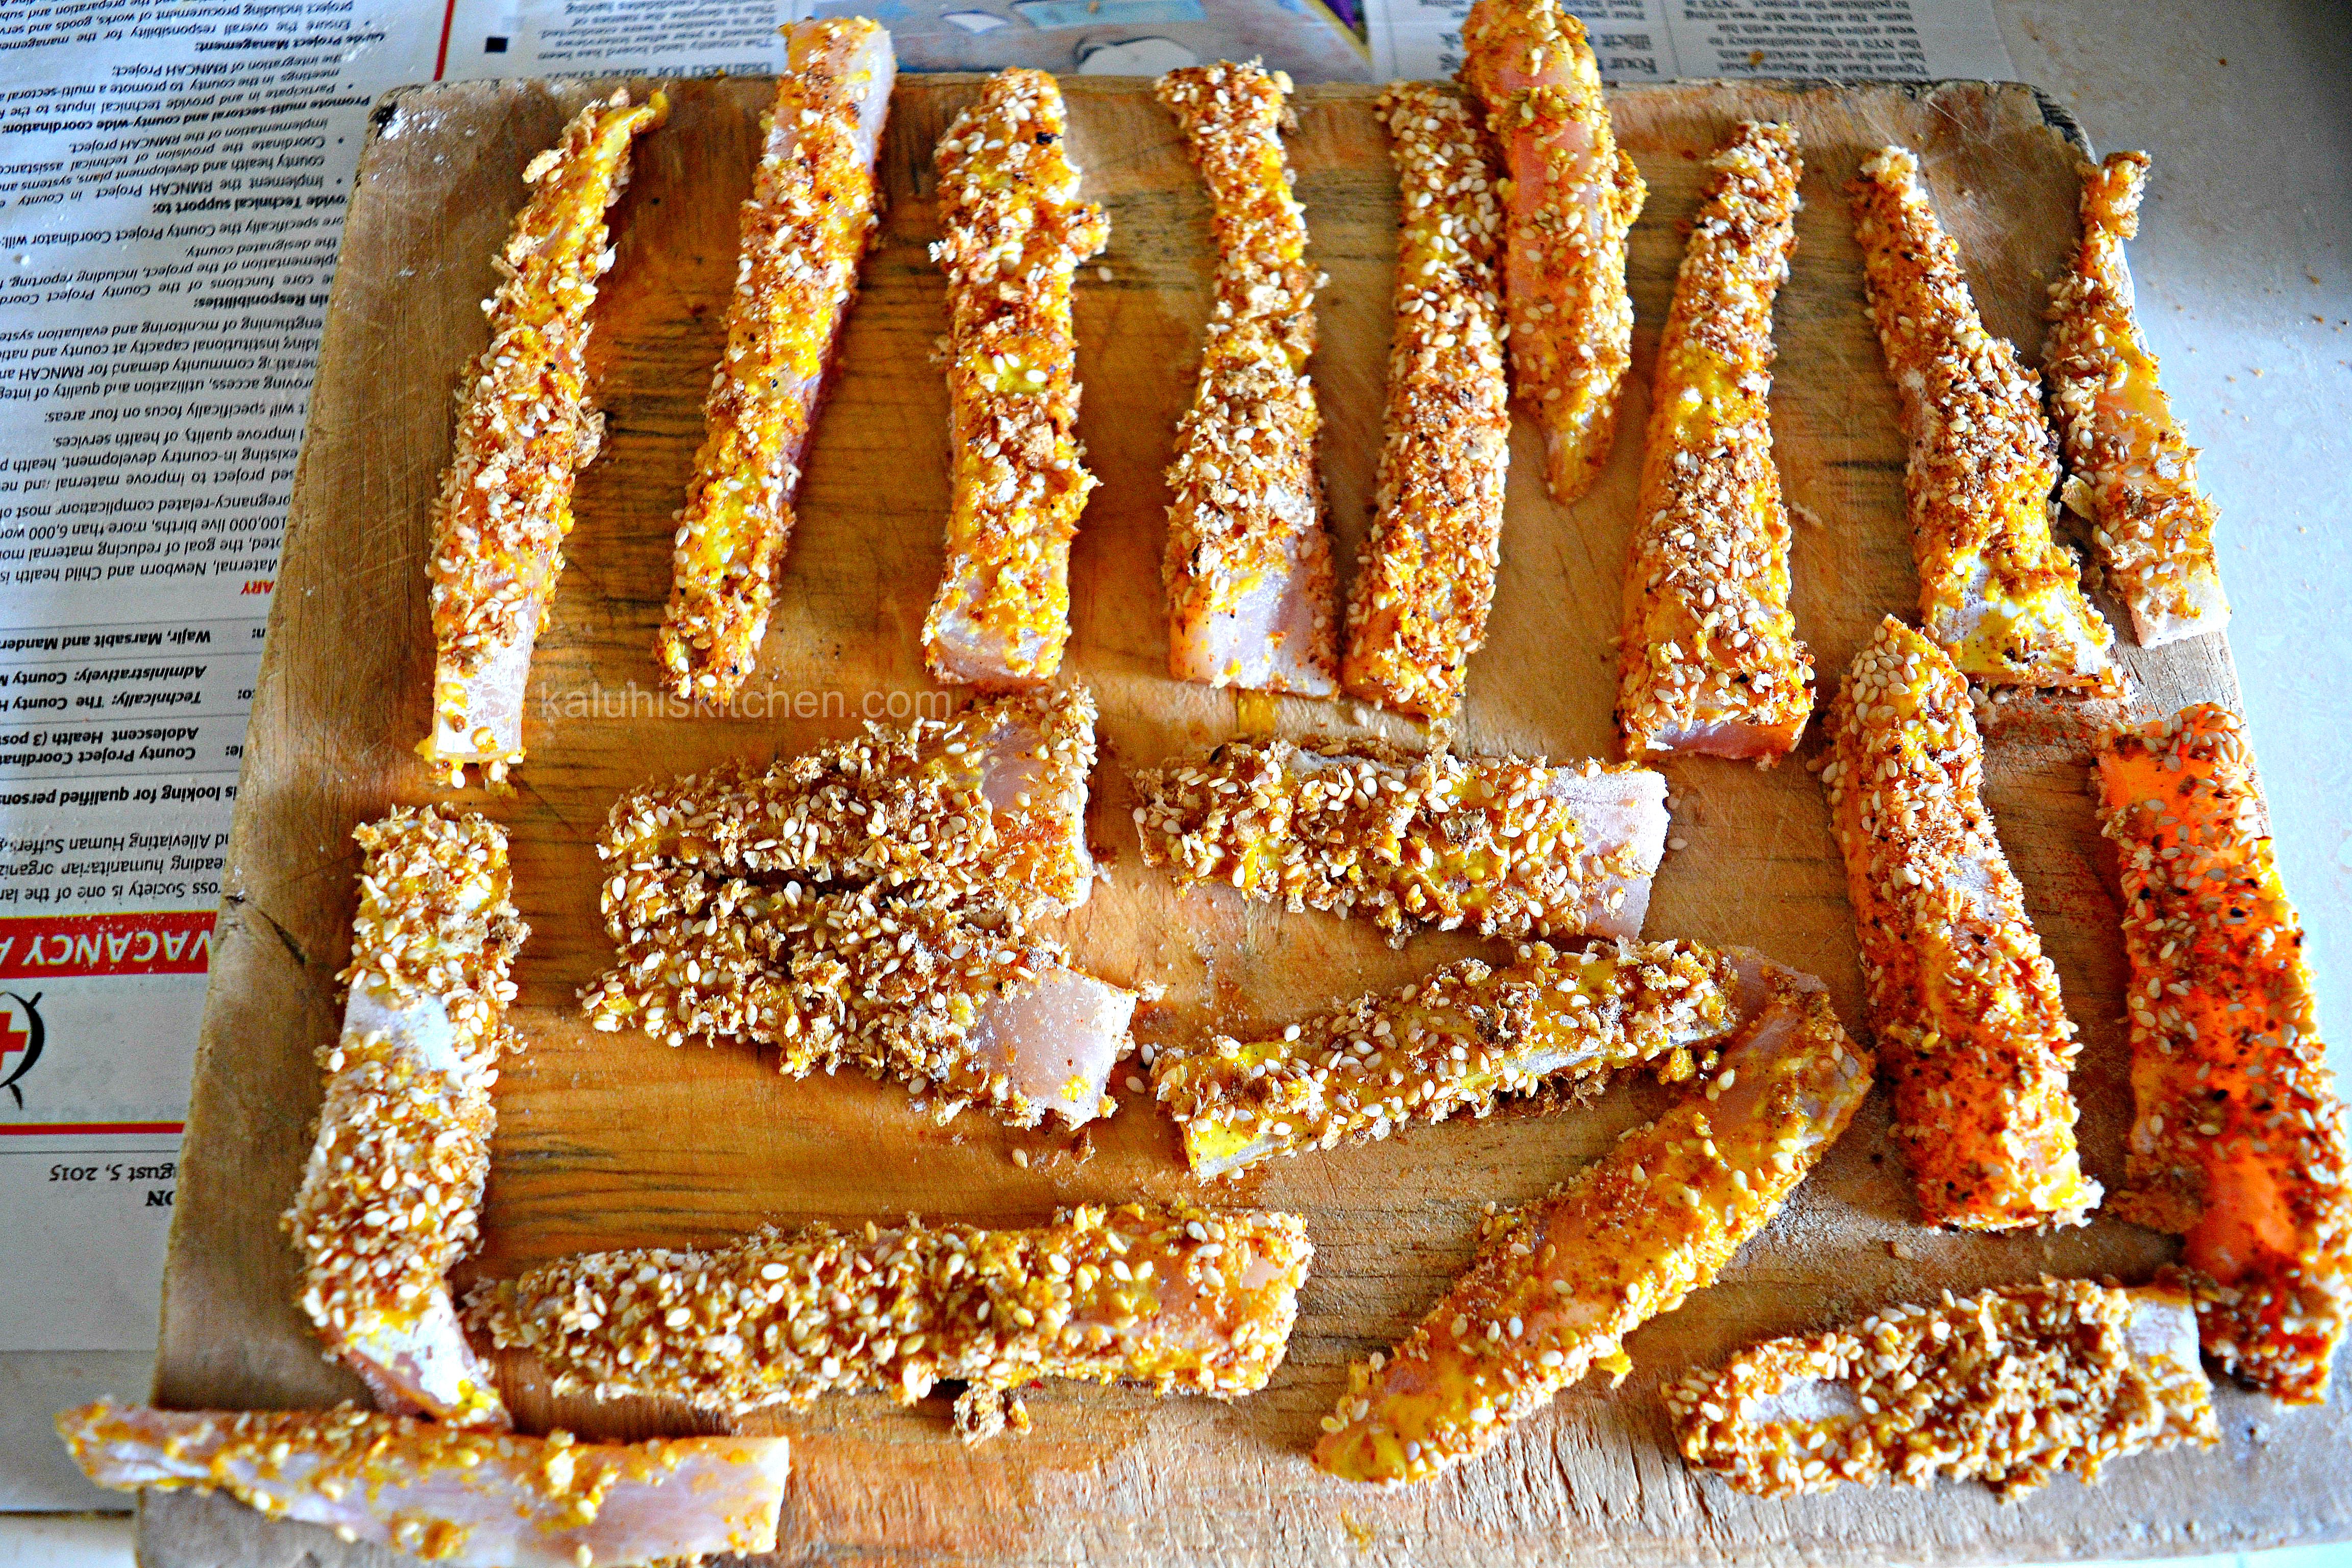 how to coat fish for fish fingers_kaluhiskitchen.com_fish fingers coated in crumbs and sesame seeds]